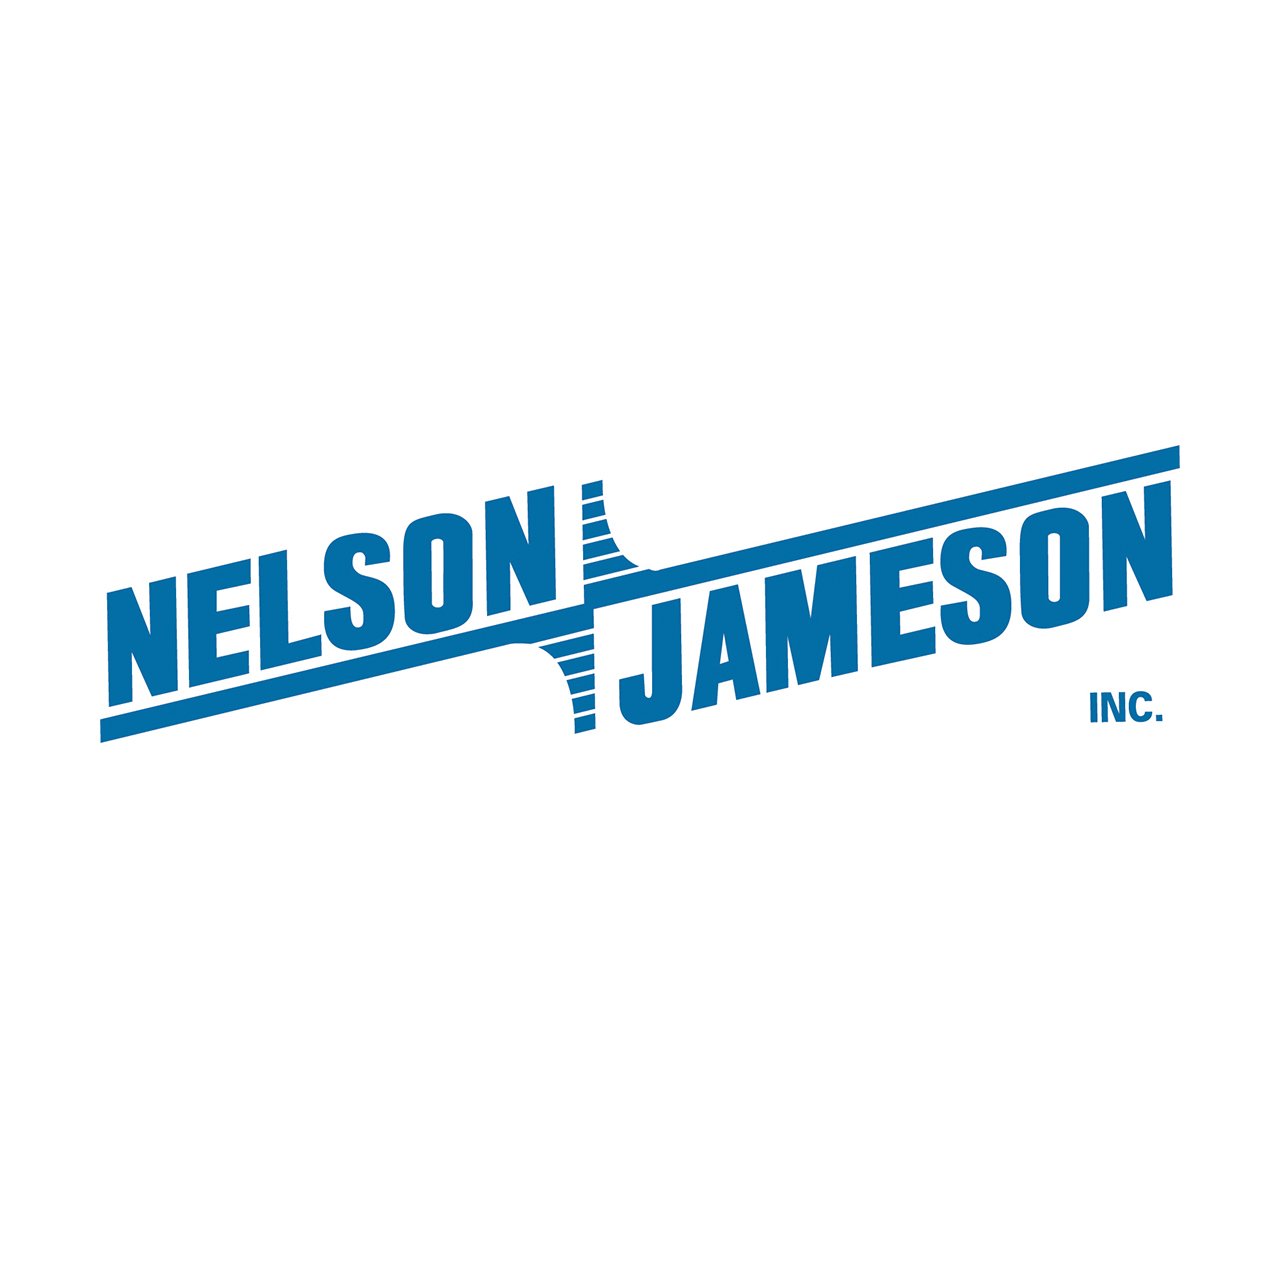 Nelson Jameson Spirit-Filled Certified Dairy Thermometers